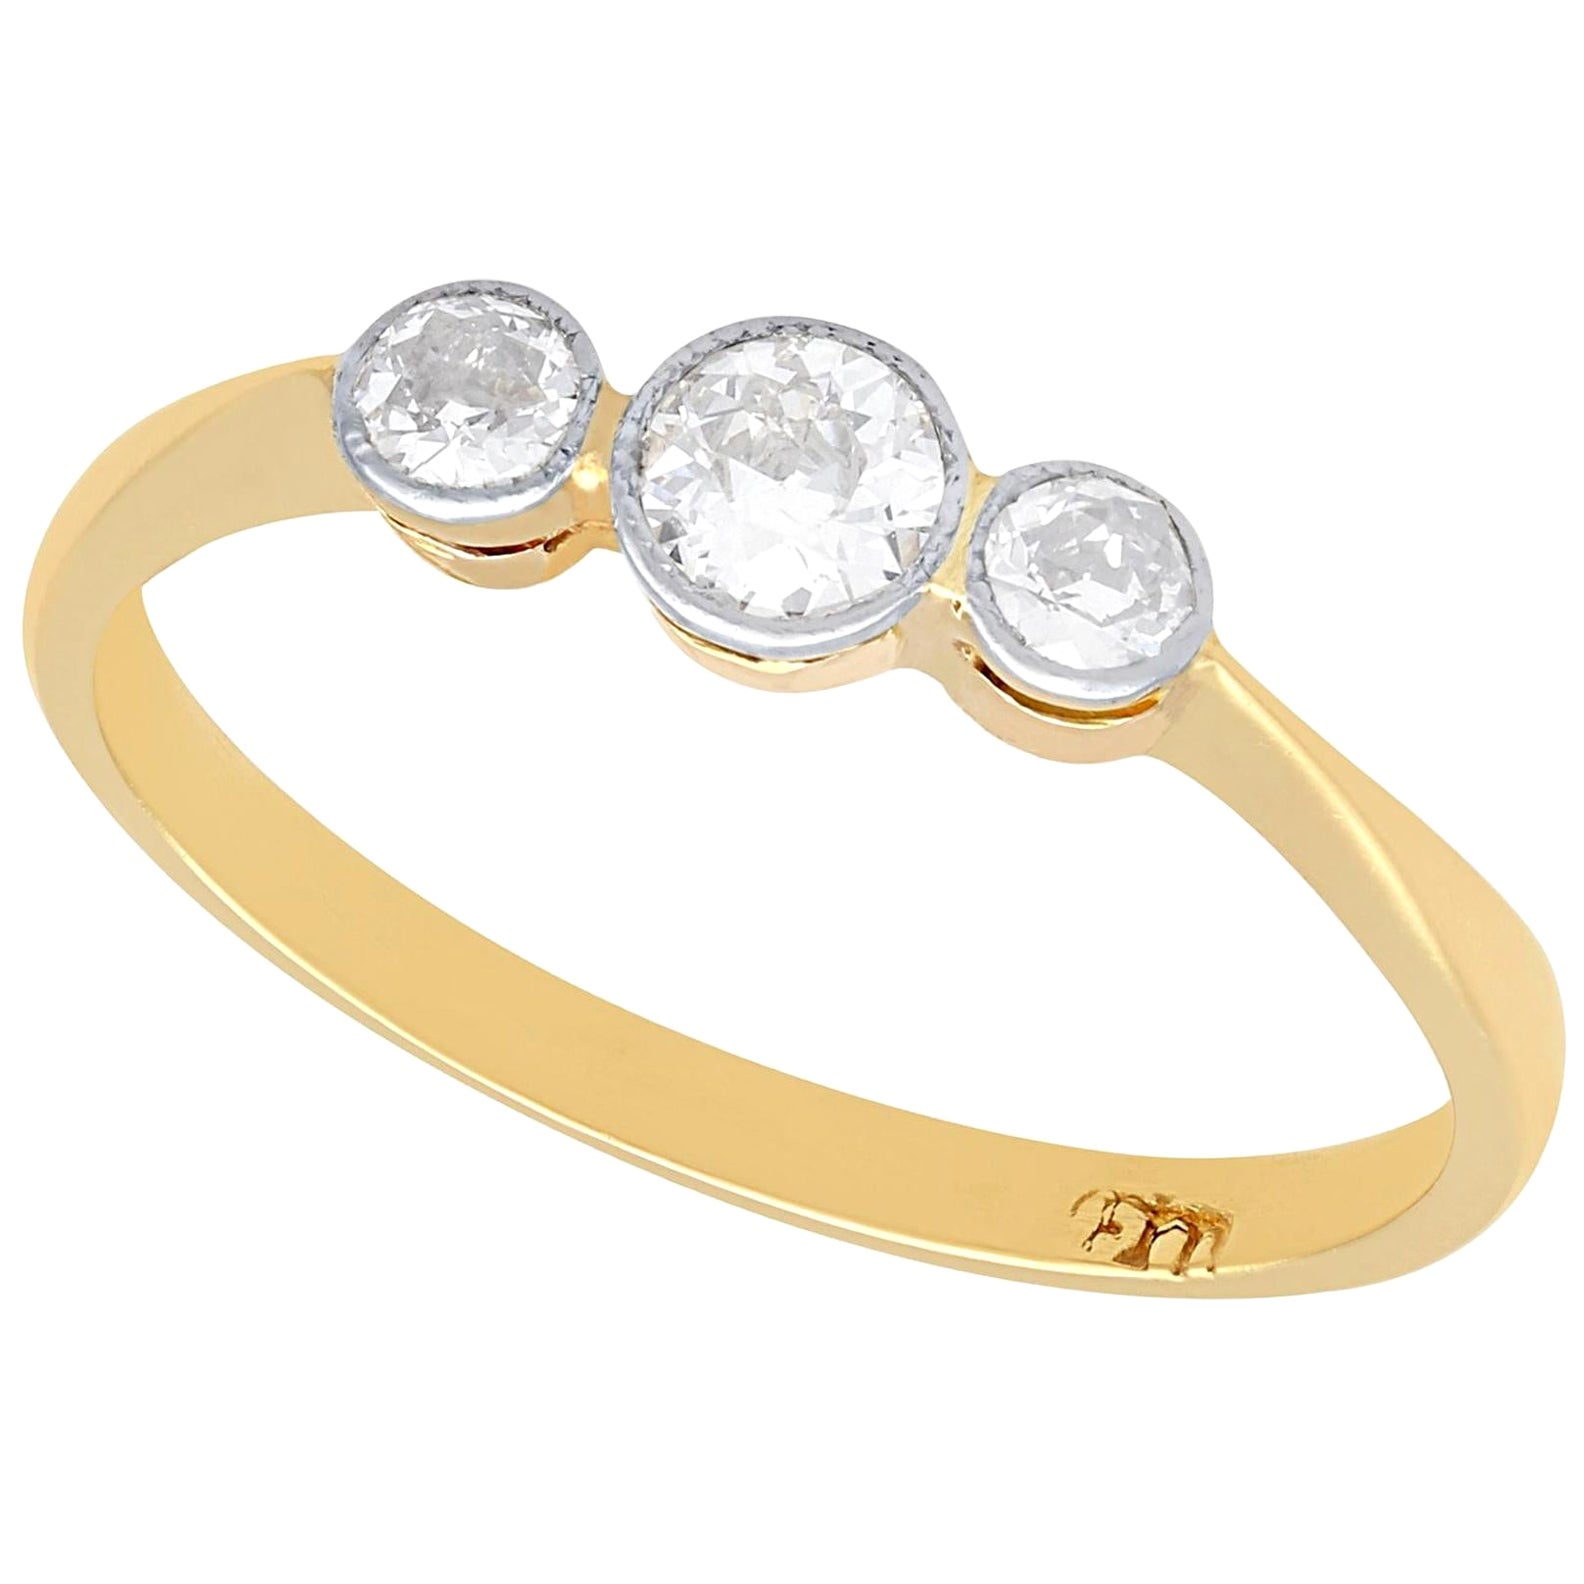 1920s Diamond and Yellow Gold Trilogy Ring